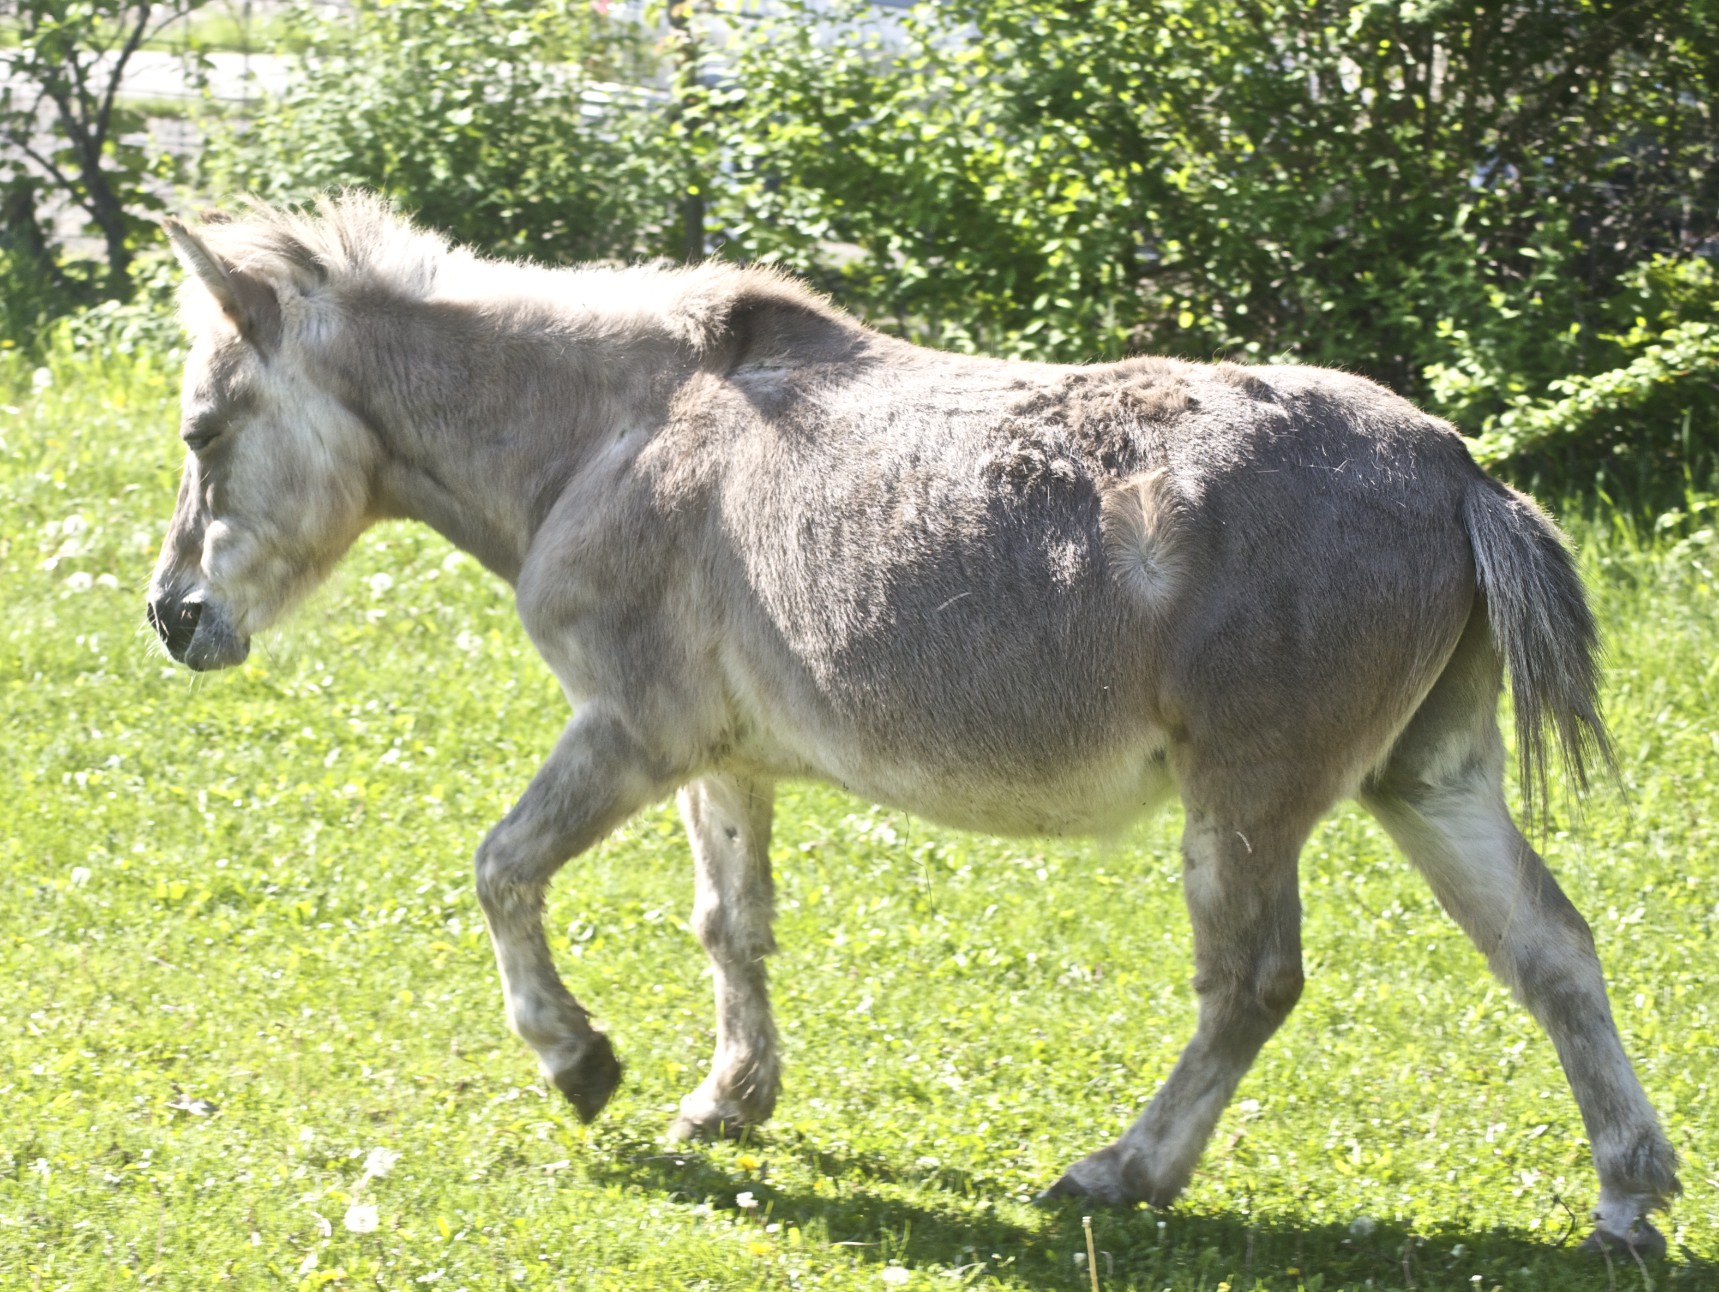 a small horse running in the grass in the sunlight